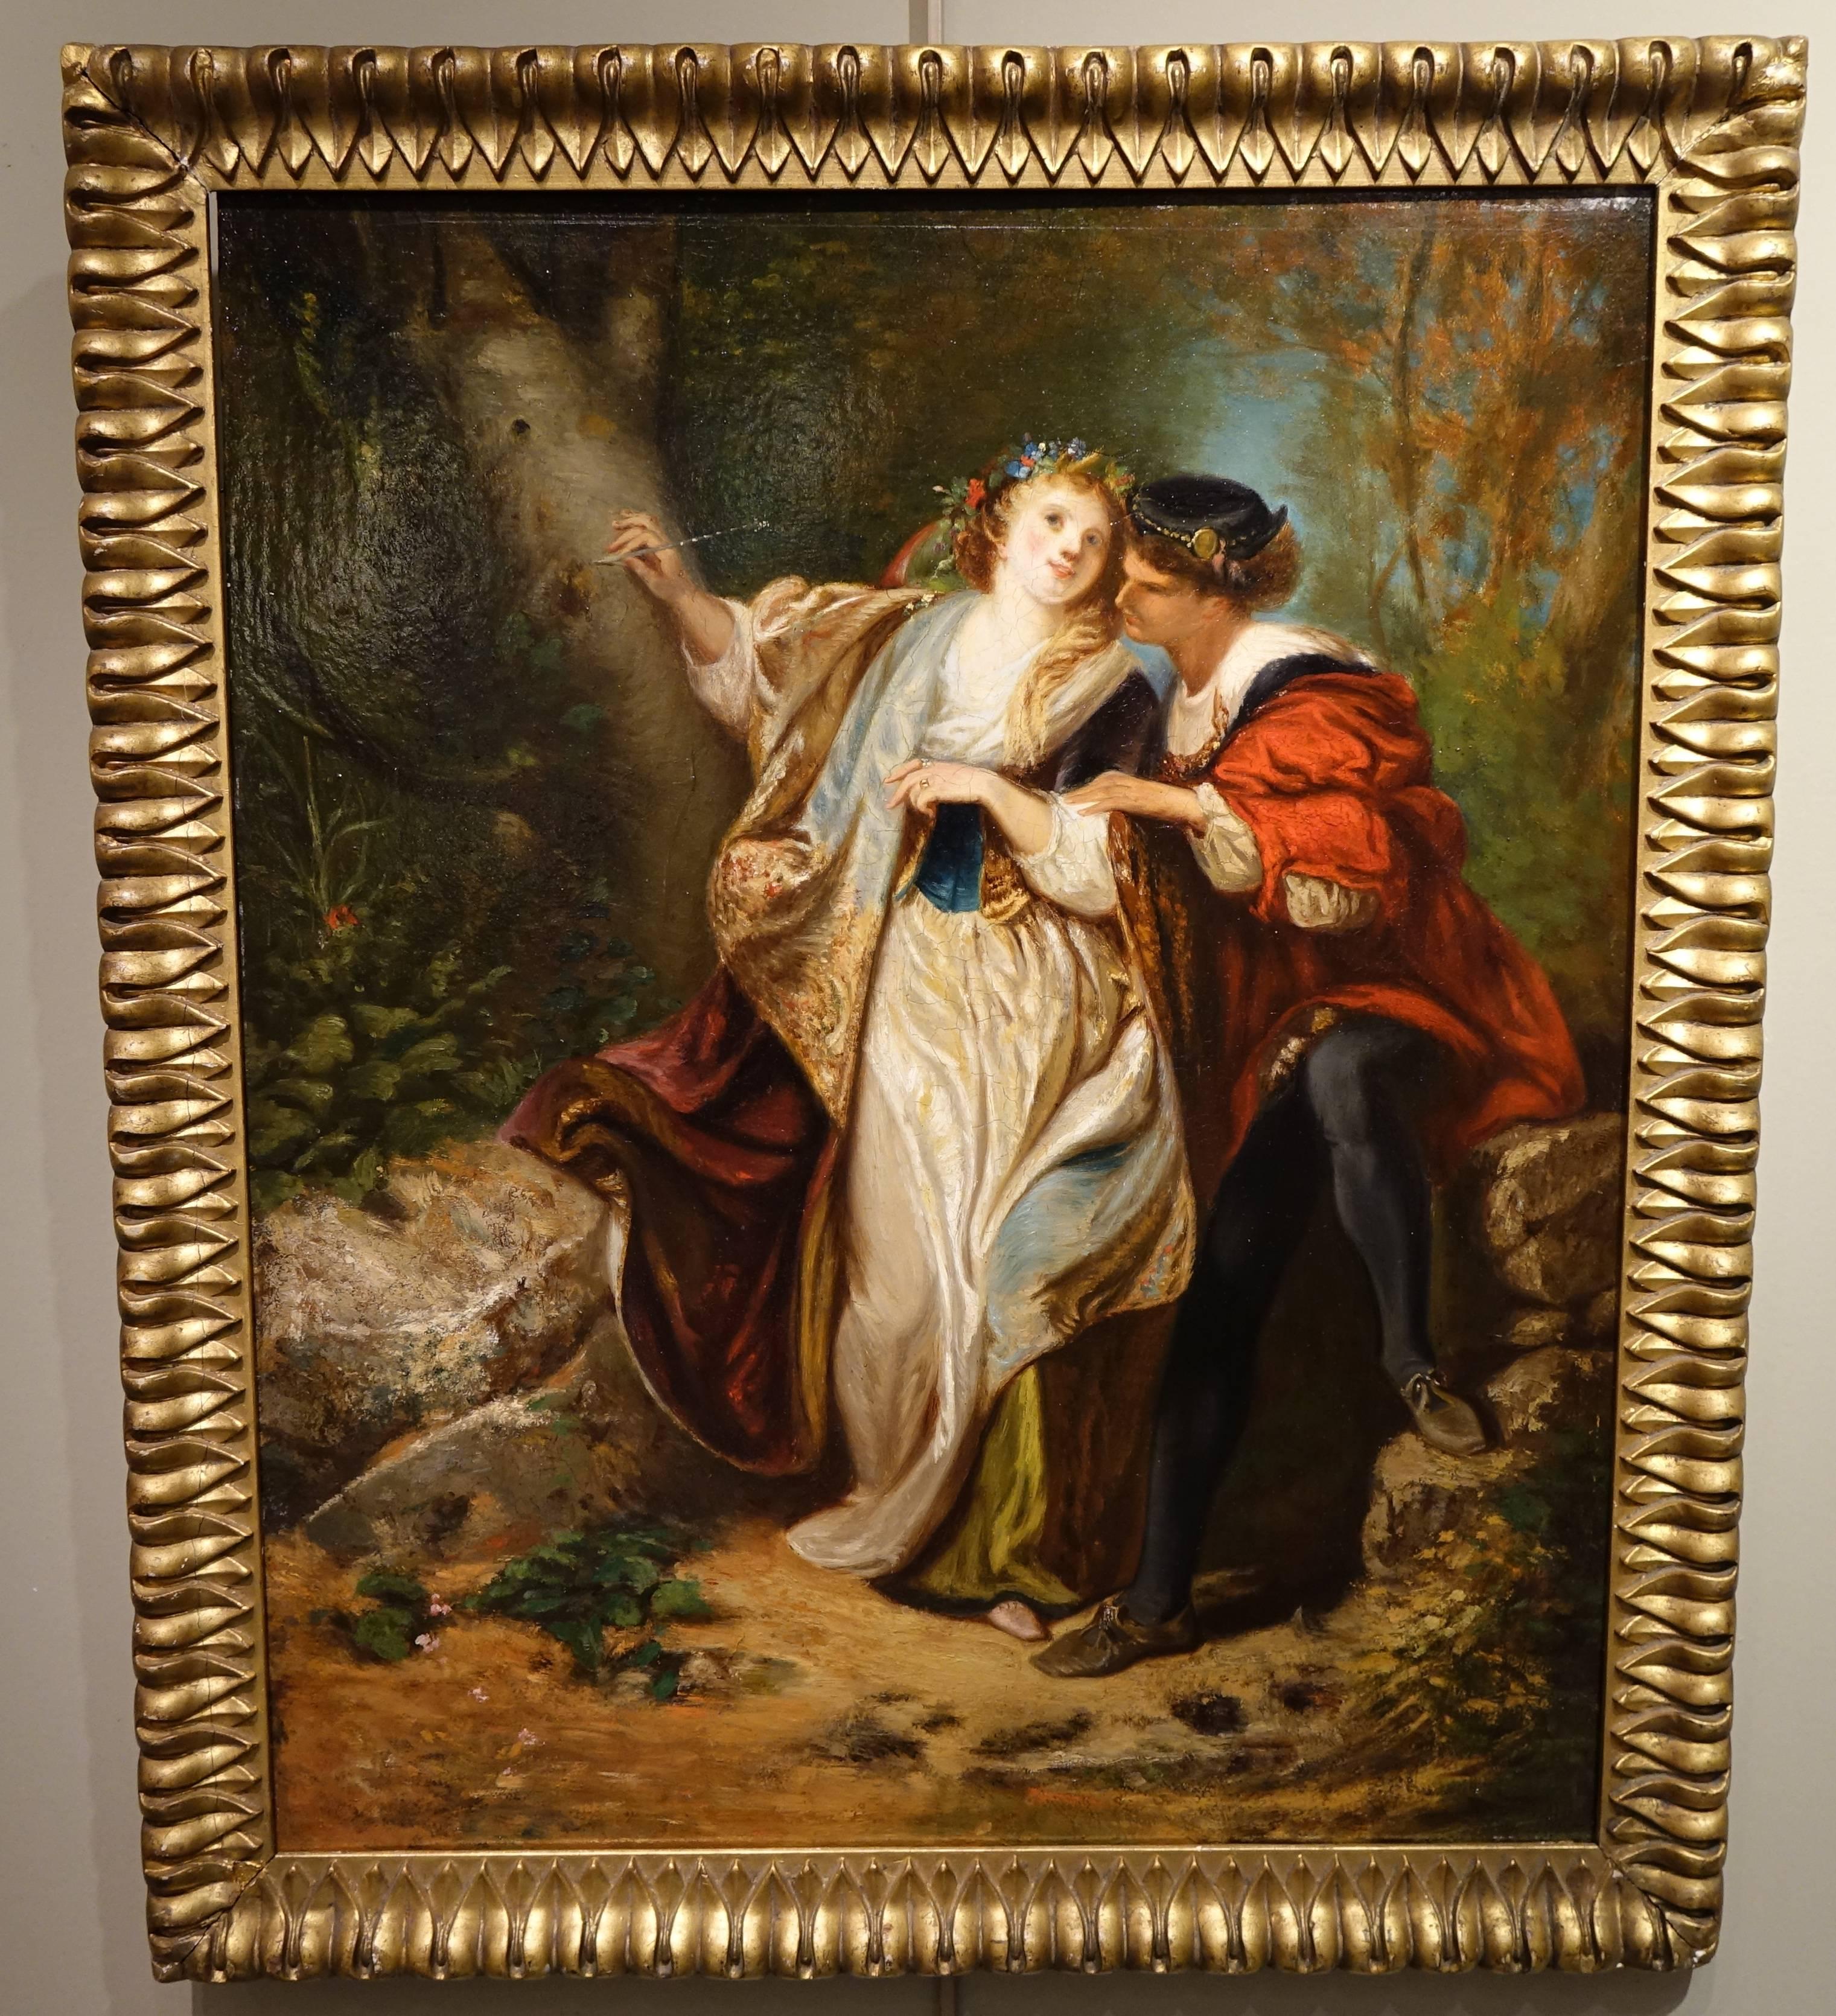 Romantic scene representing Paolo and Francesca, oil on panel, 
France 19th century.
Paolo and Francesca , Dante's famous poem from the divine comedy.